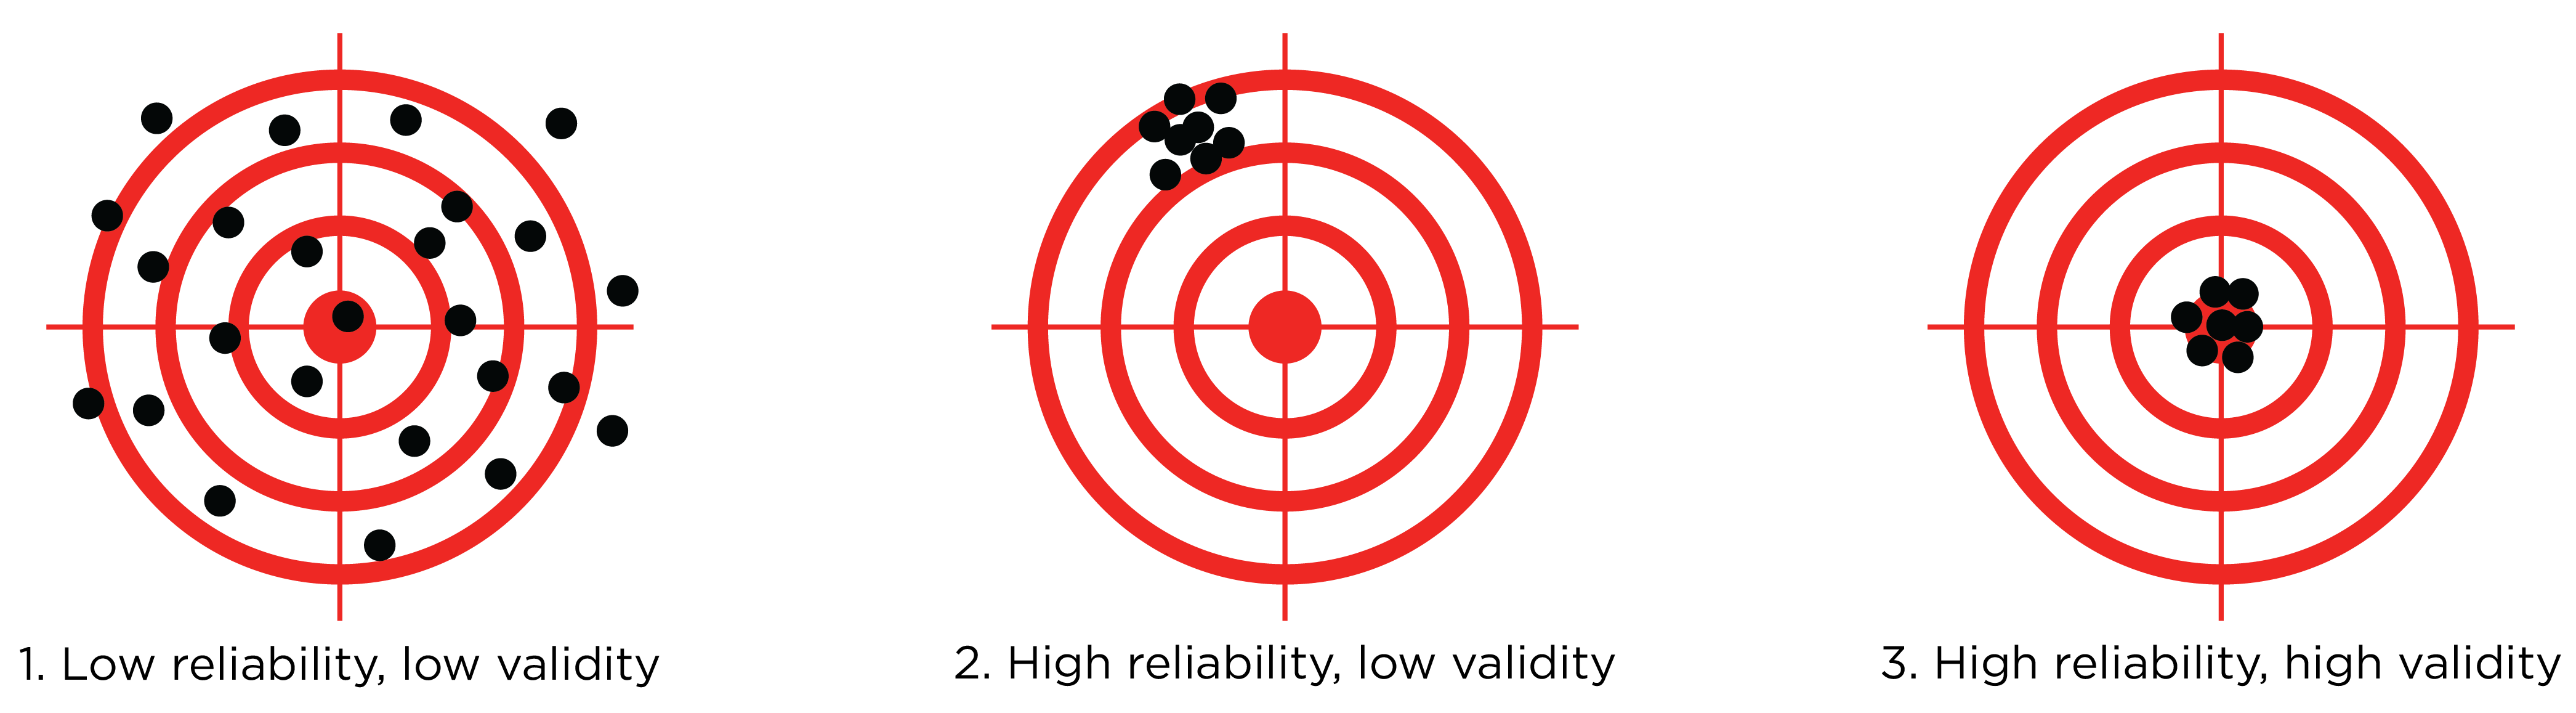 Traditional Depiction of Reliability (Consistency) Versus Validity (Accuracy).